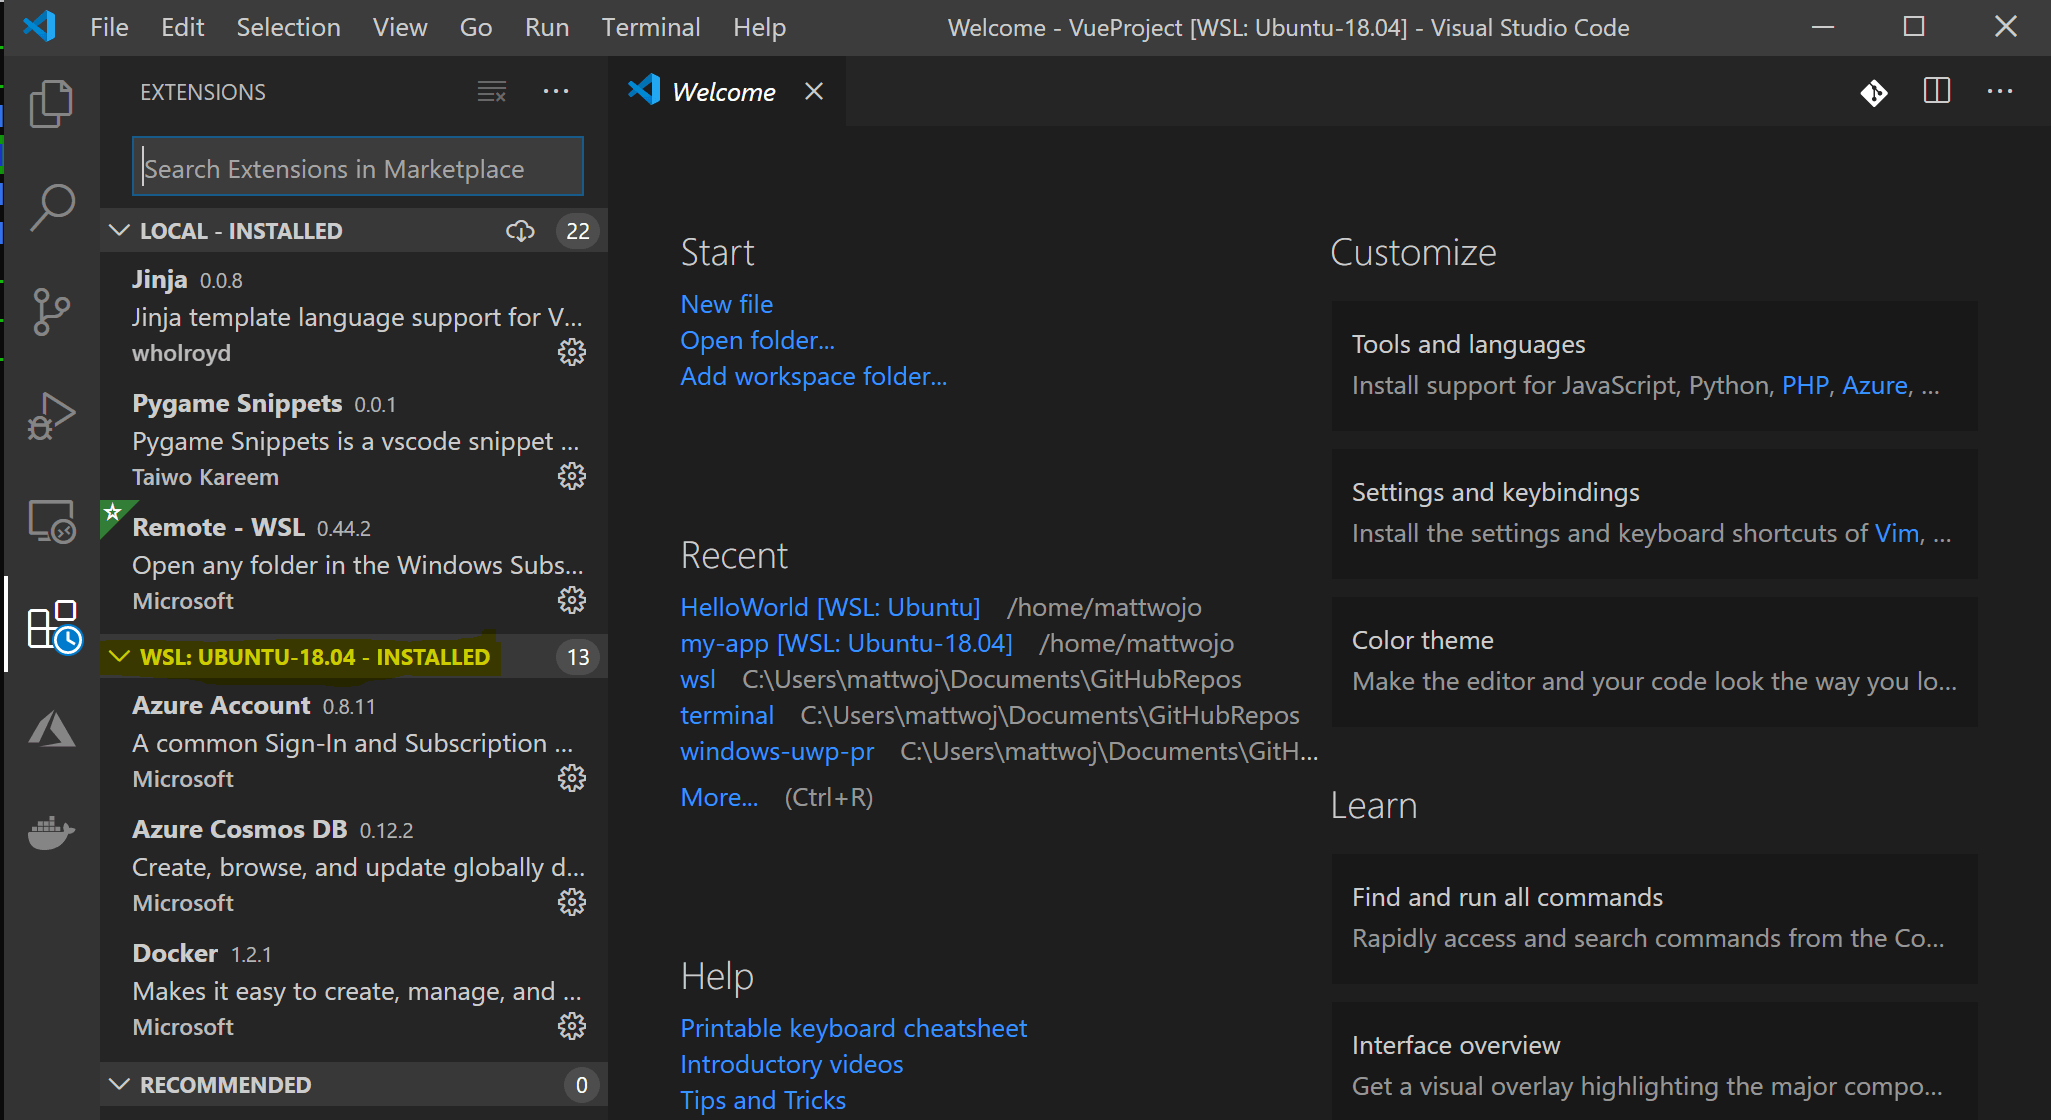 VS Code with Remote - WSL extensions vs local extensions